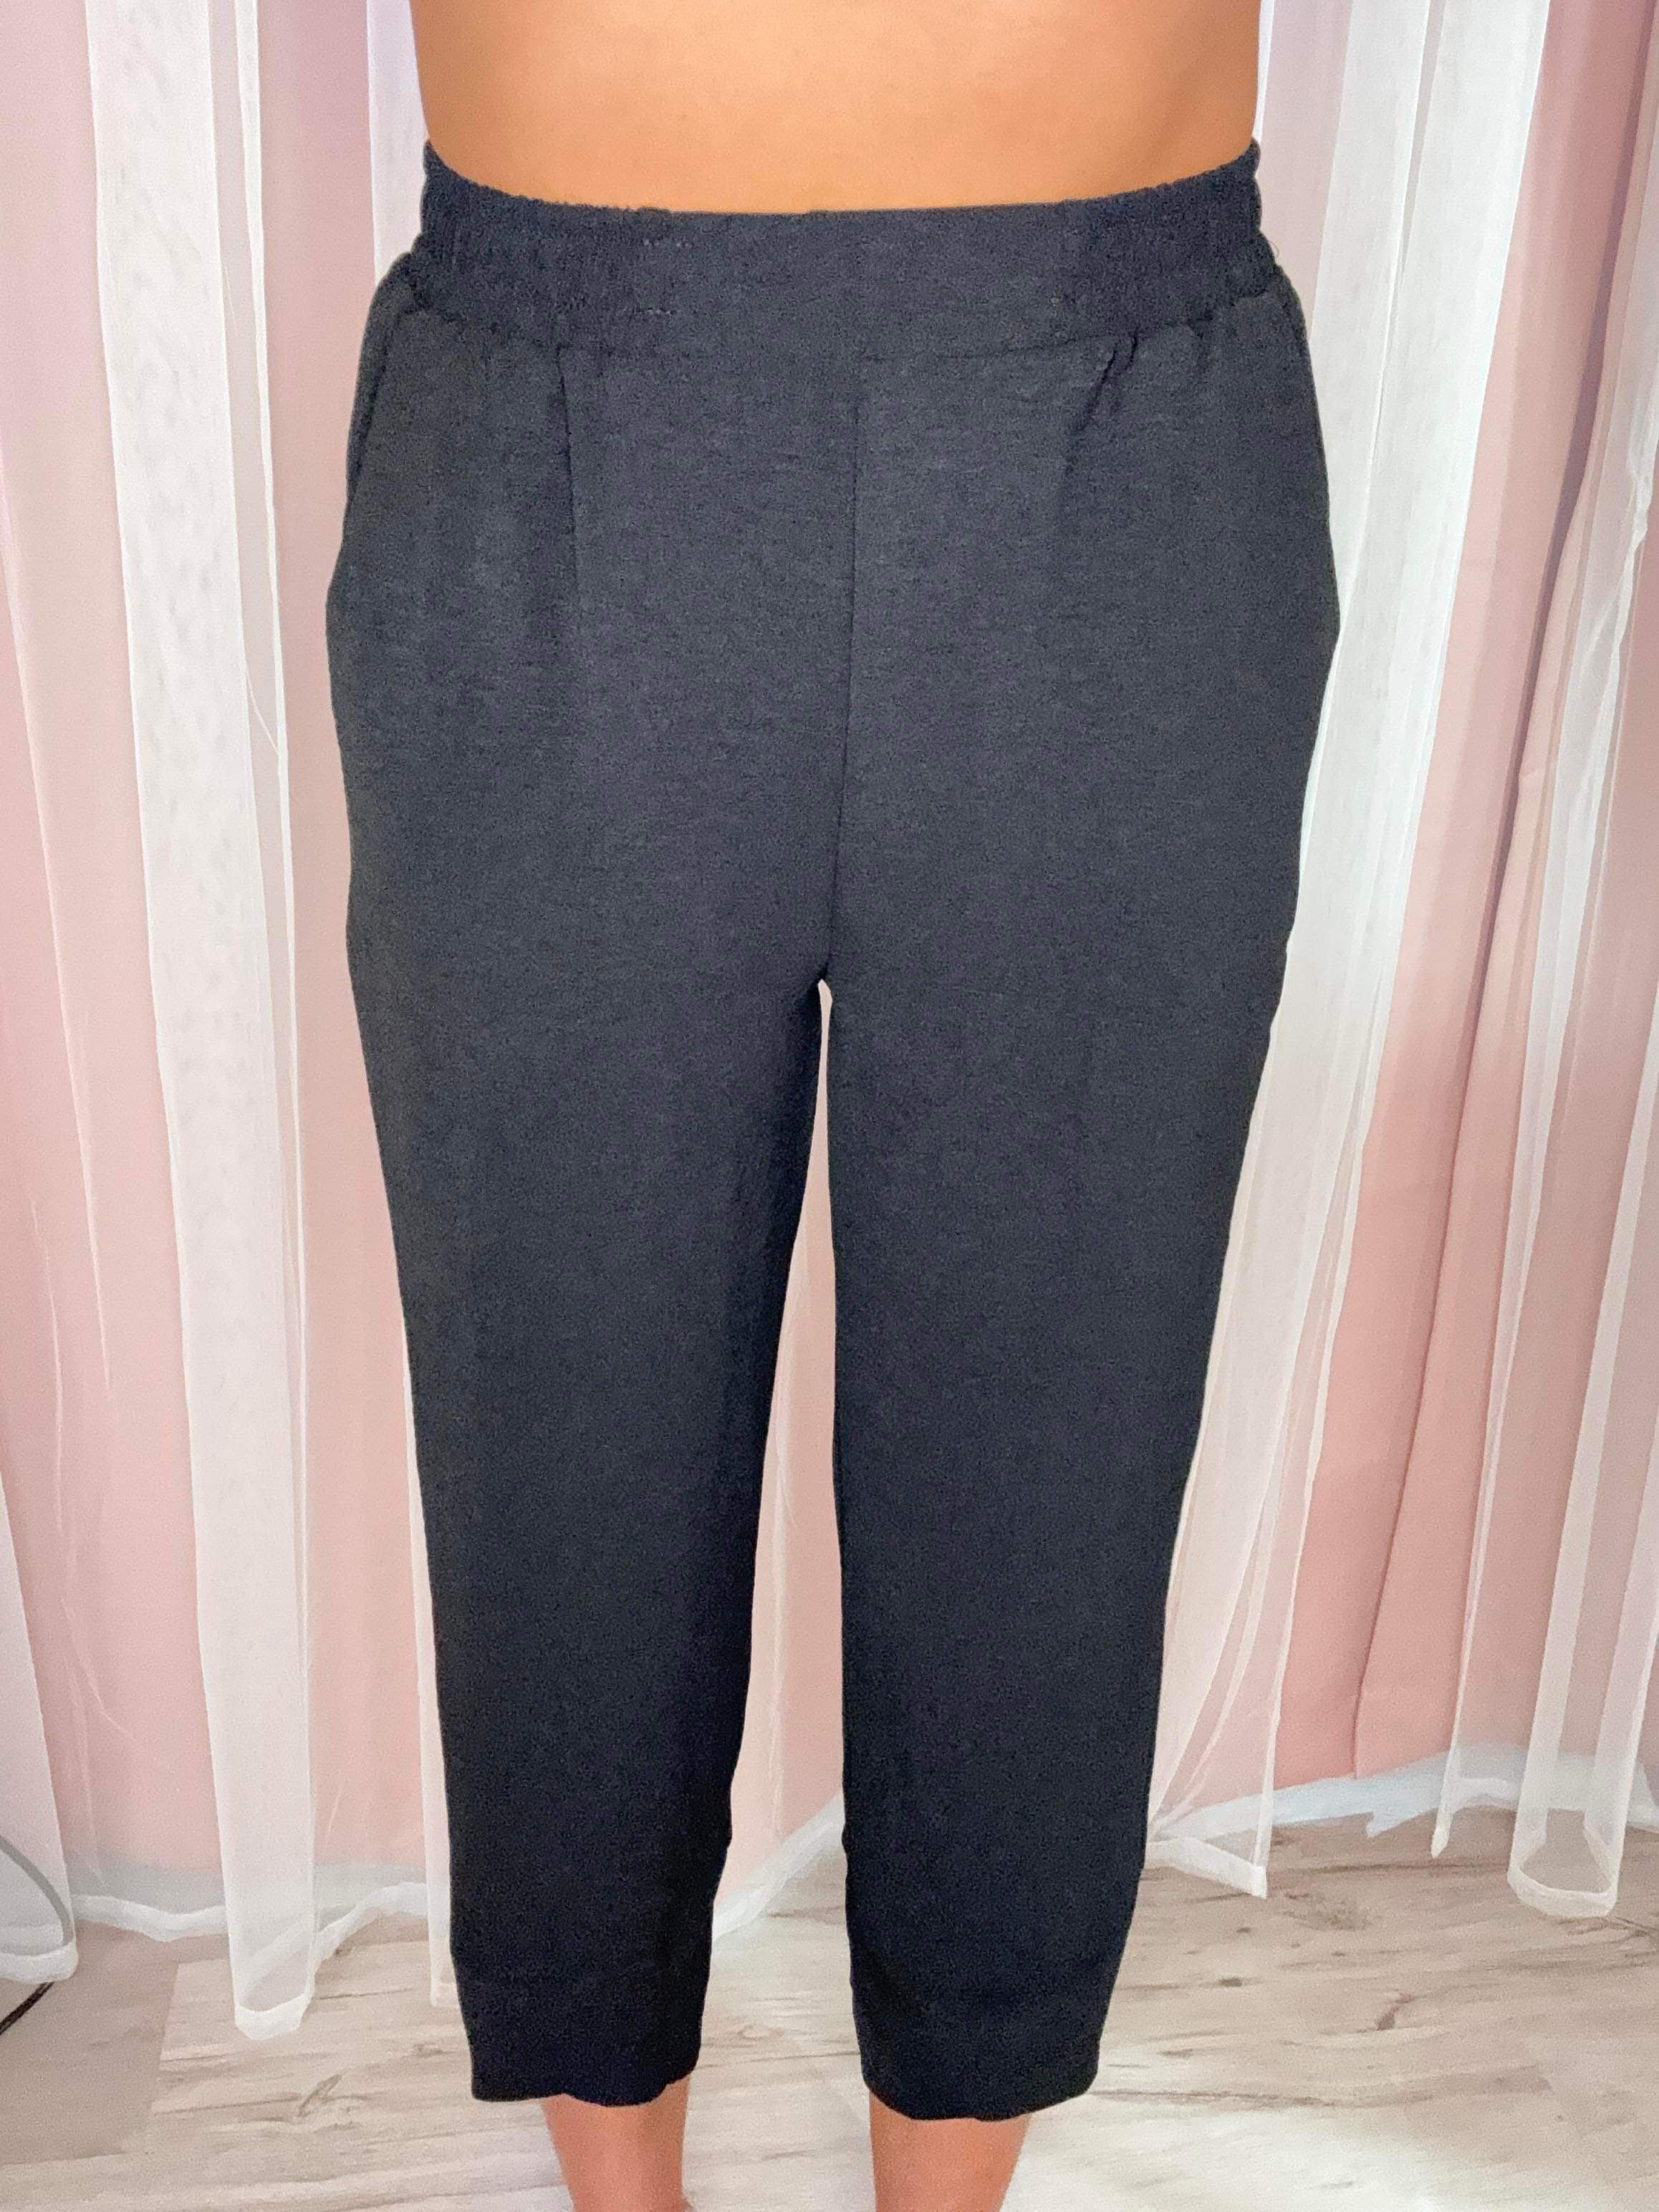 White Birch High Waisted Knit Pant